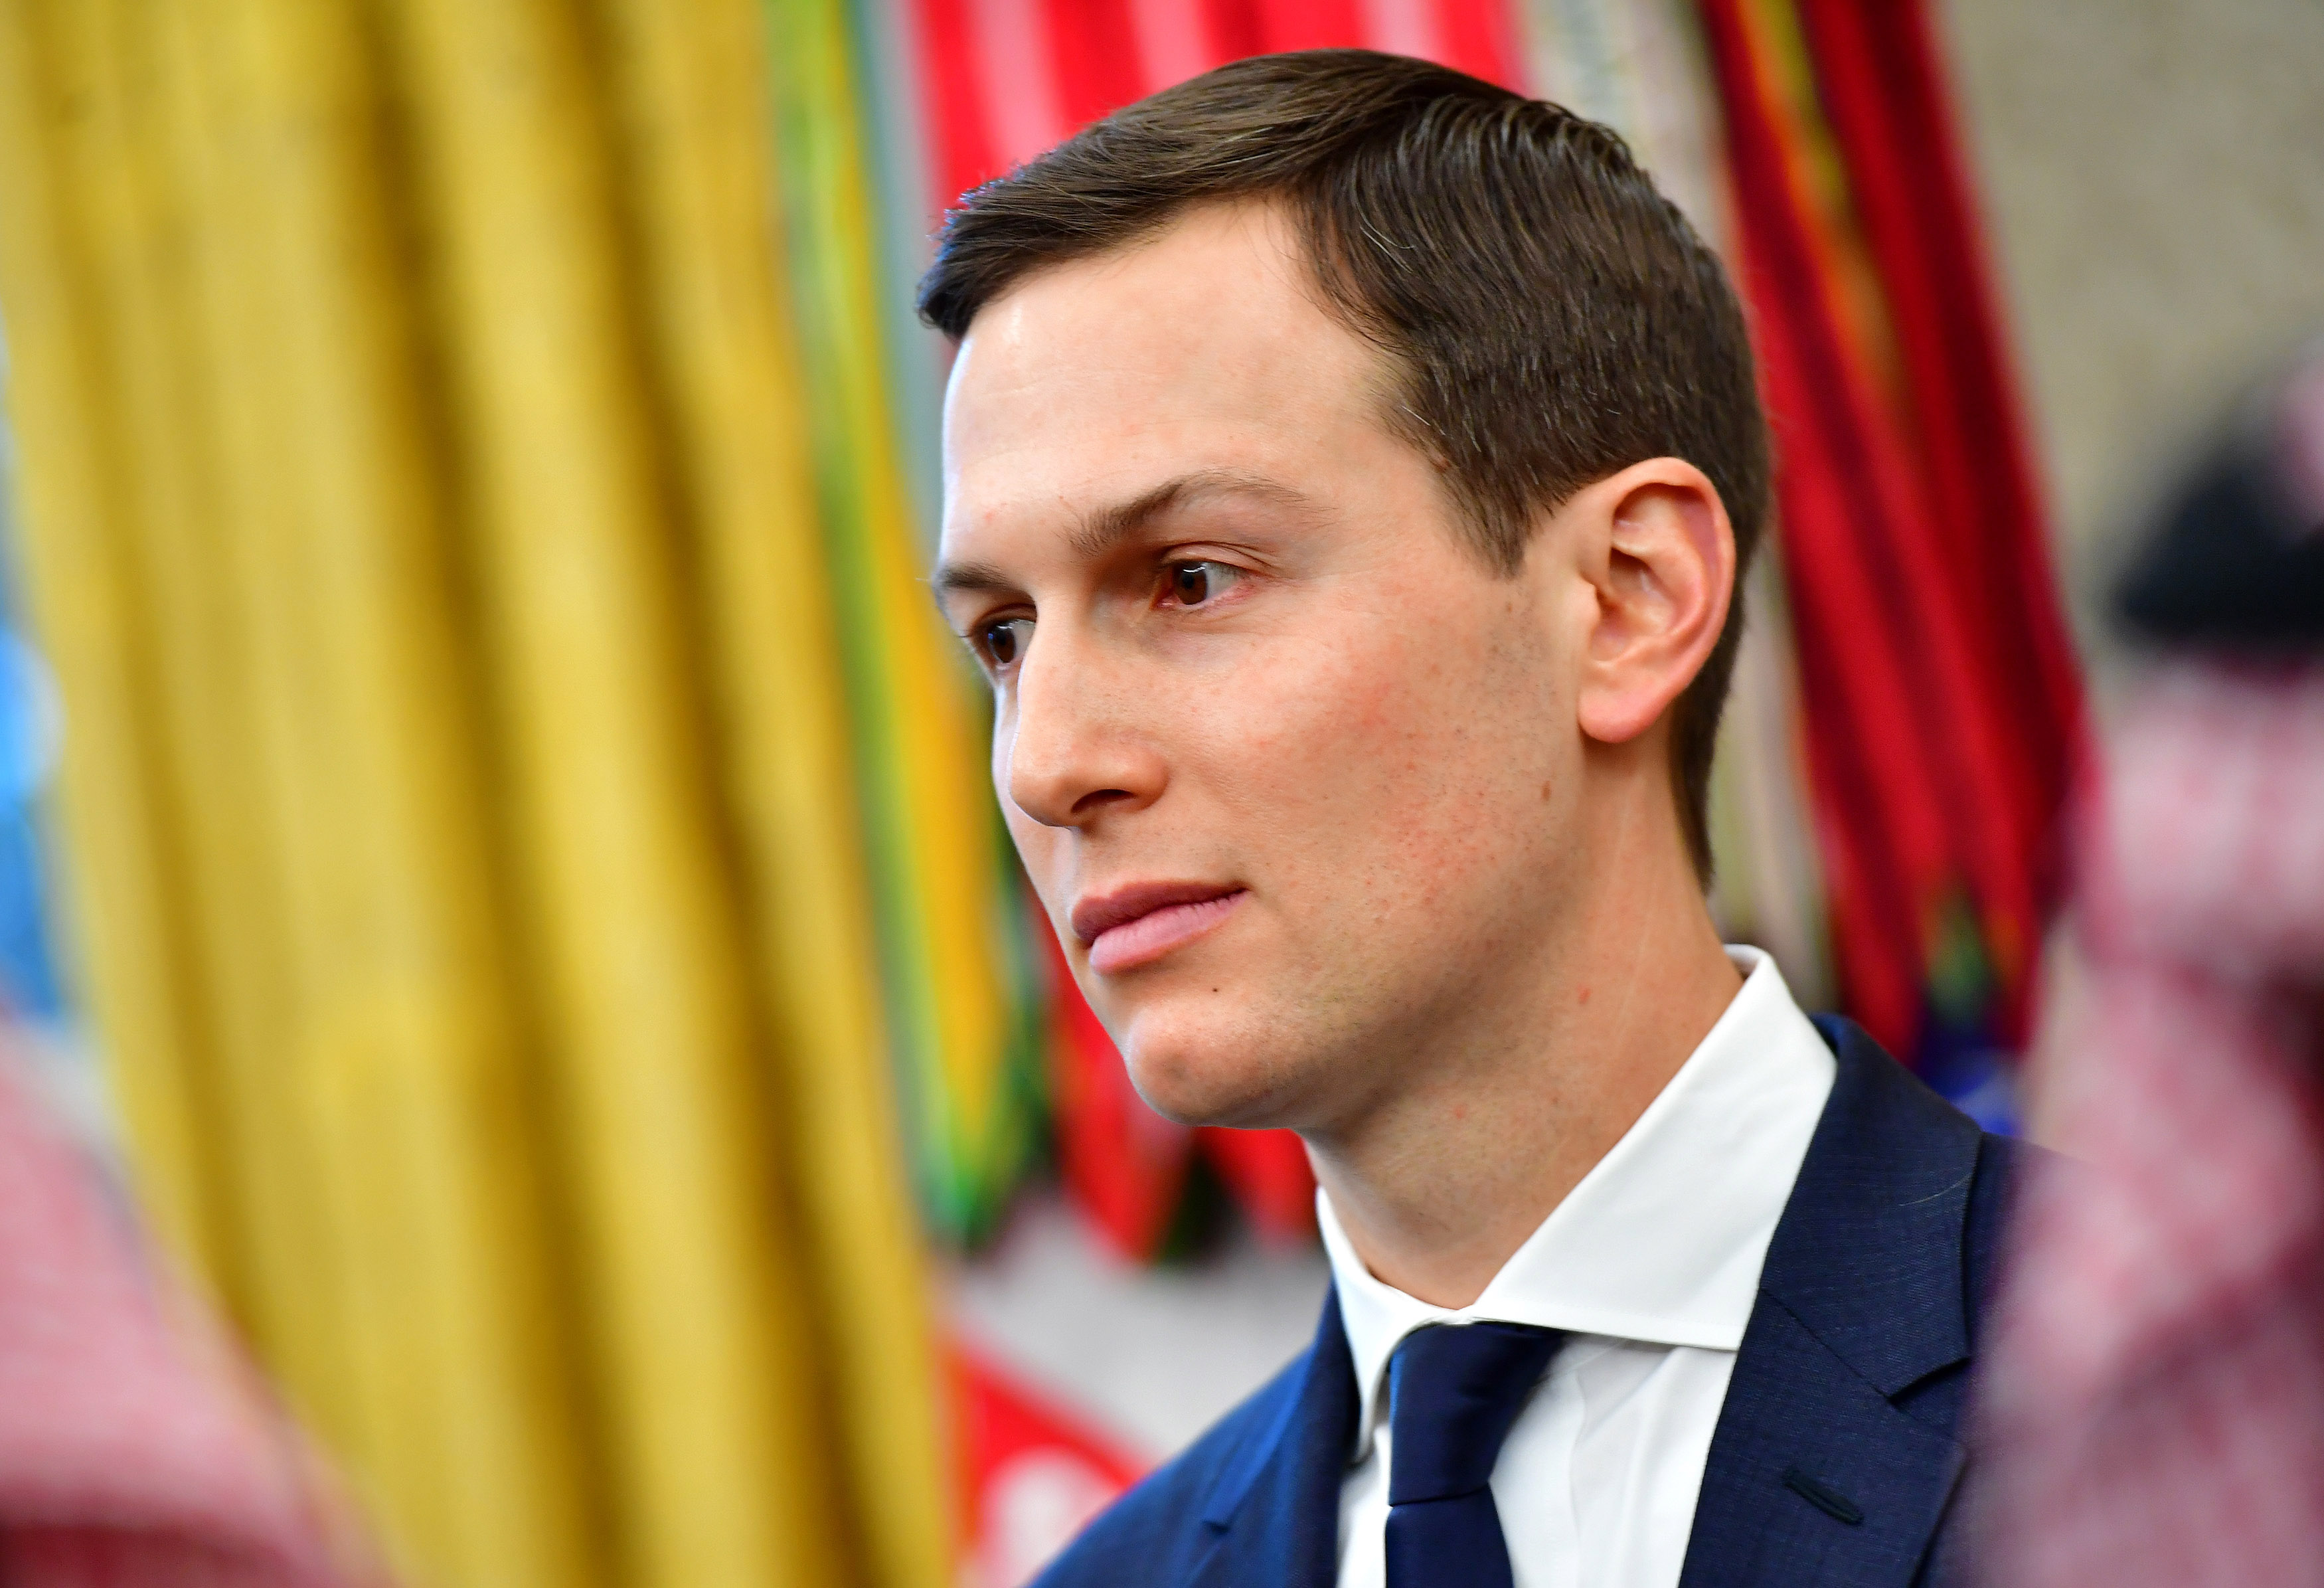 Jared Kushner in the Oval Office on, March 20, 2018. (Getty Images) (Kevin Dietsch—Bloomberg/Getty Images)